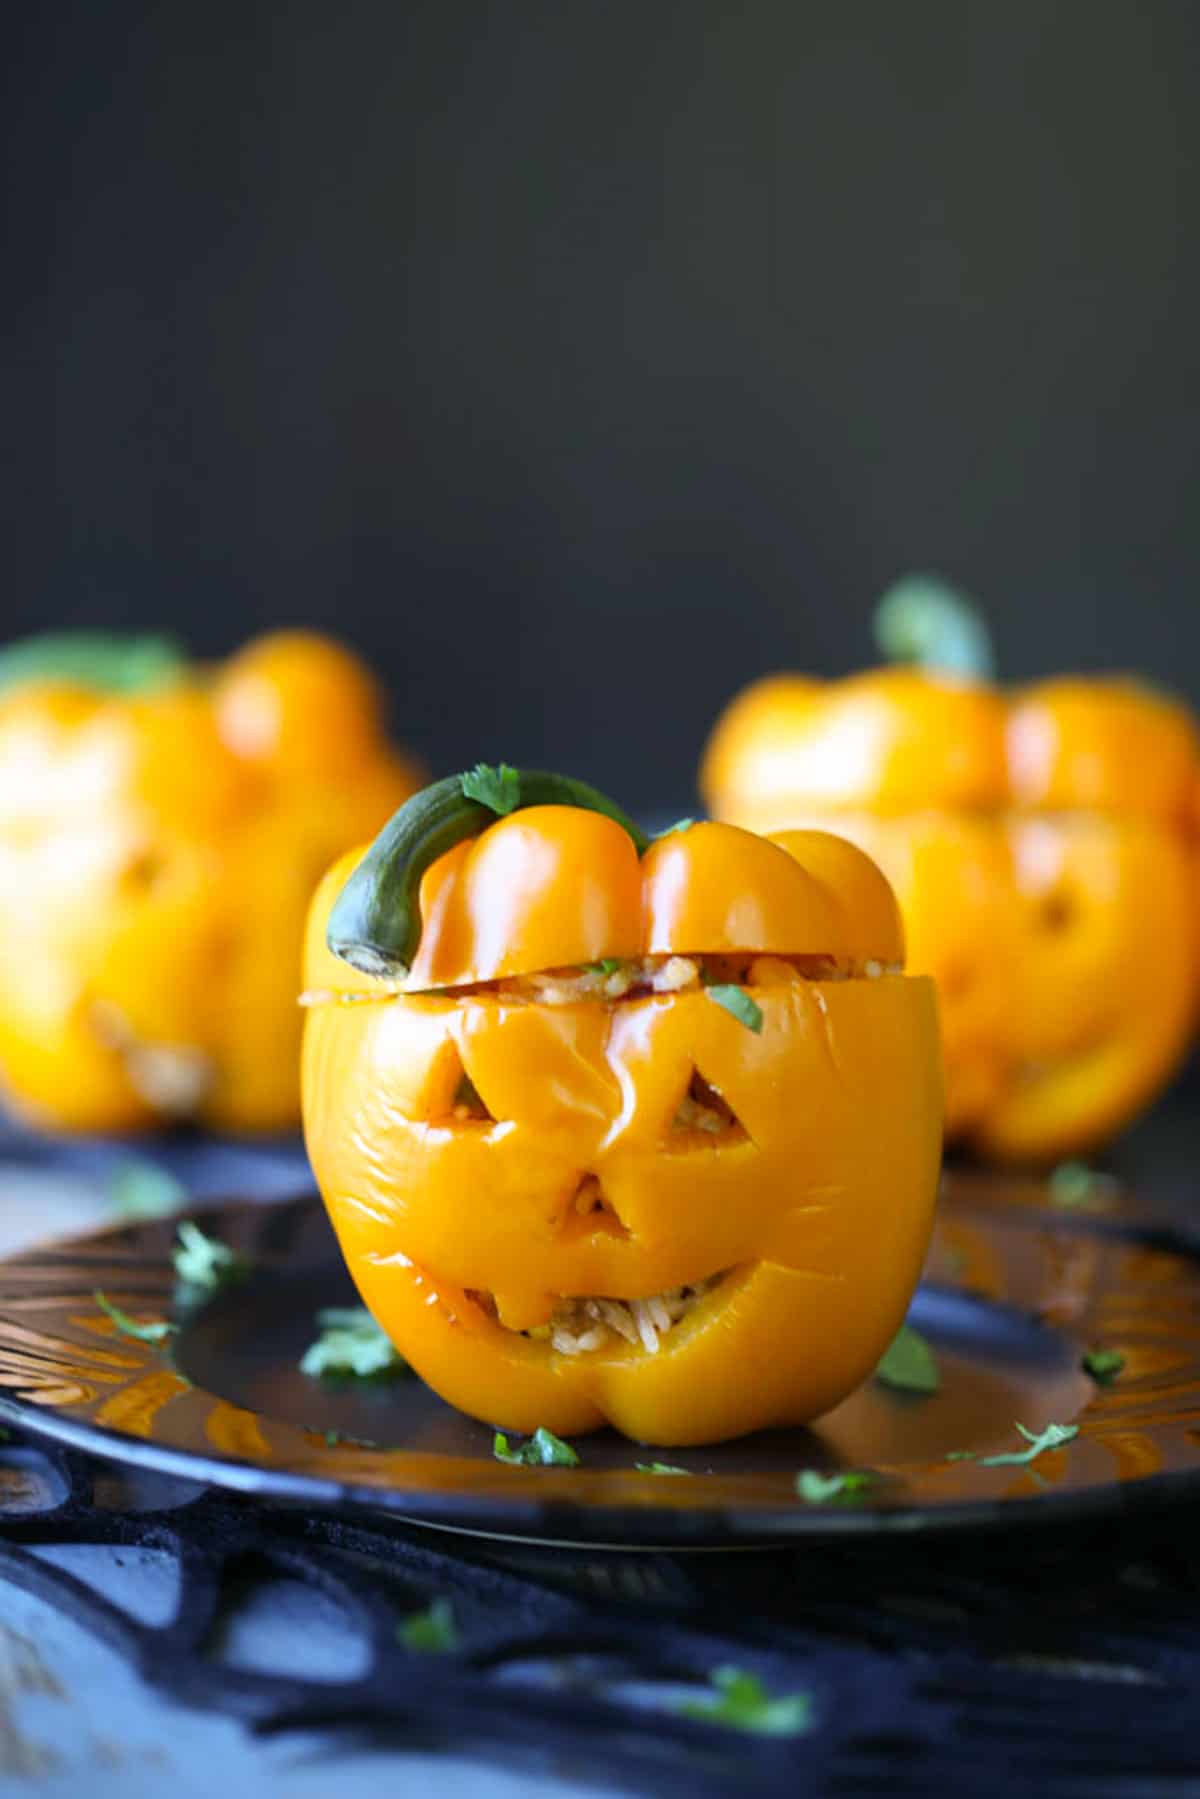 orange bell peppers with jack o lantern faces carved into them, sitting on a black plate.